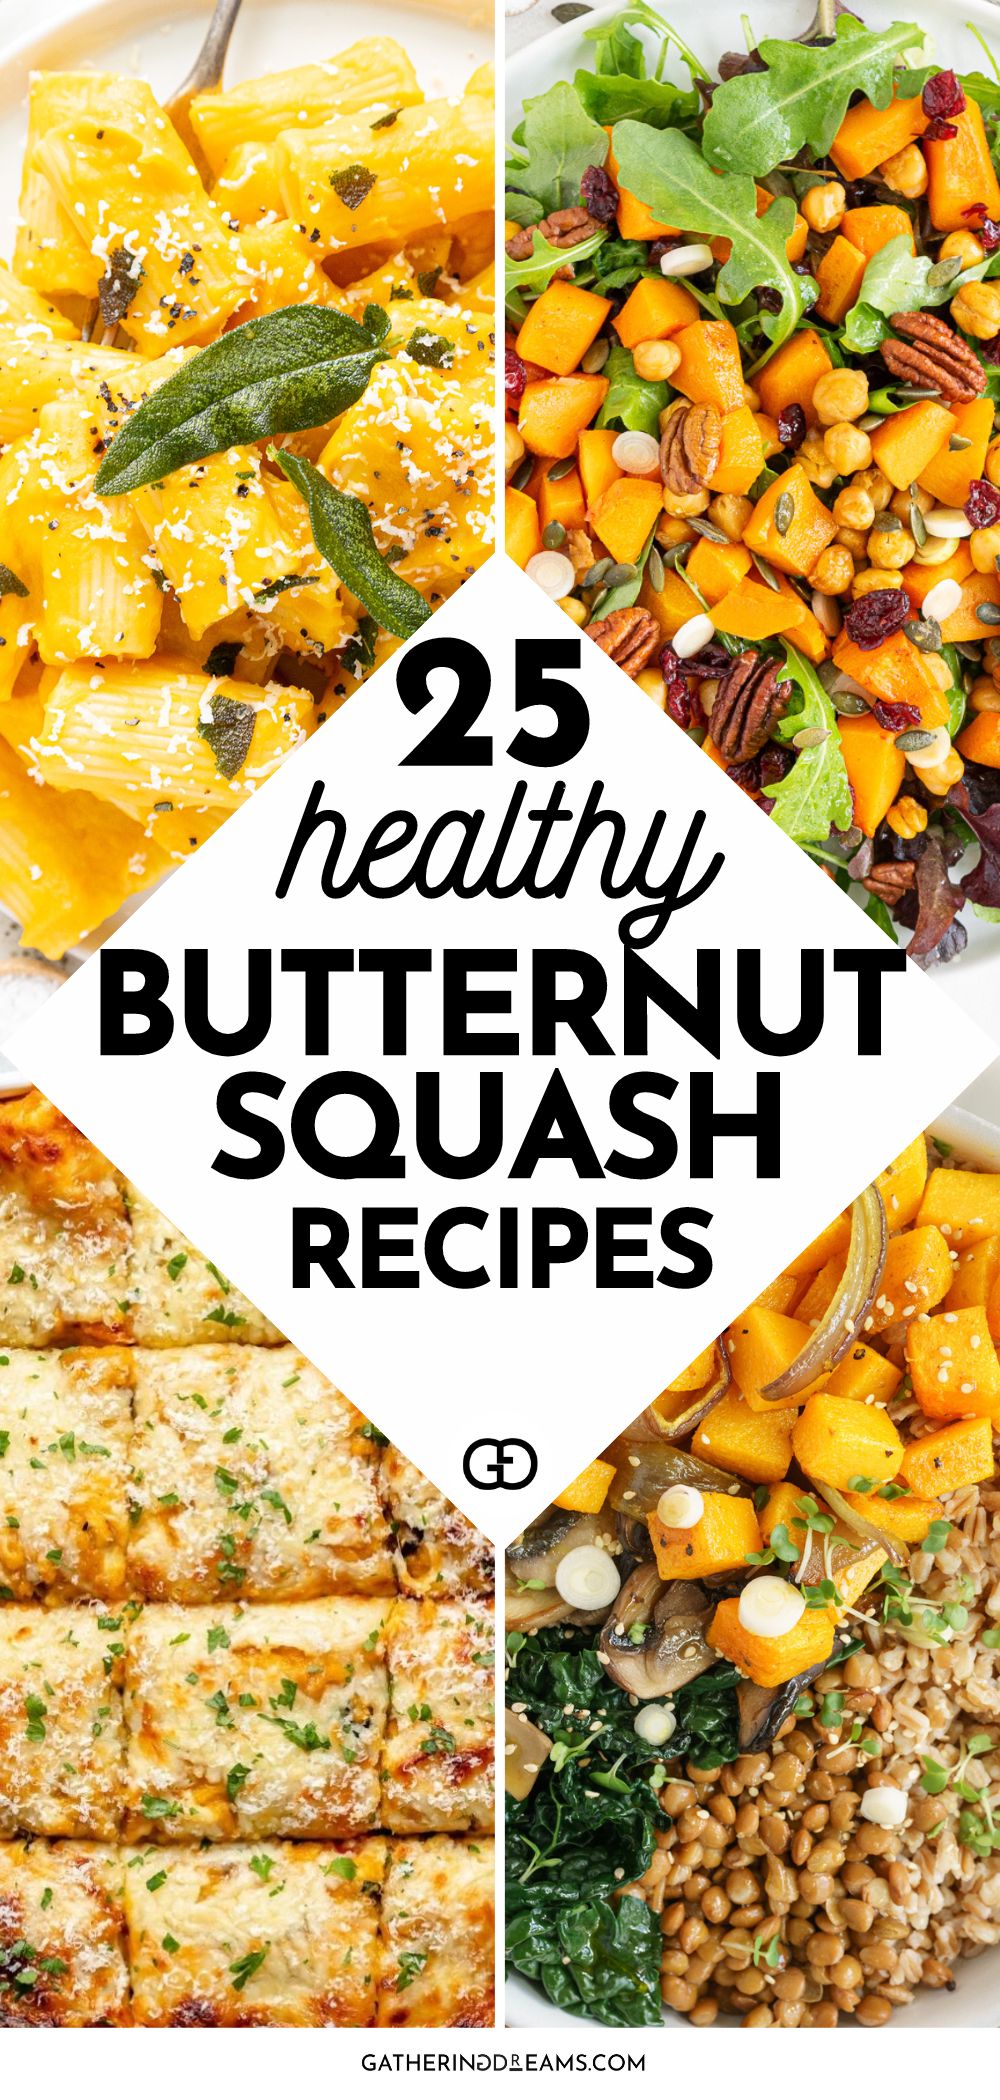 25 Healthy Butternut Squash Recipes You'll Fall in Love With